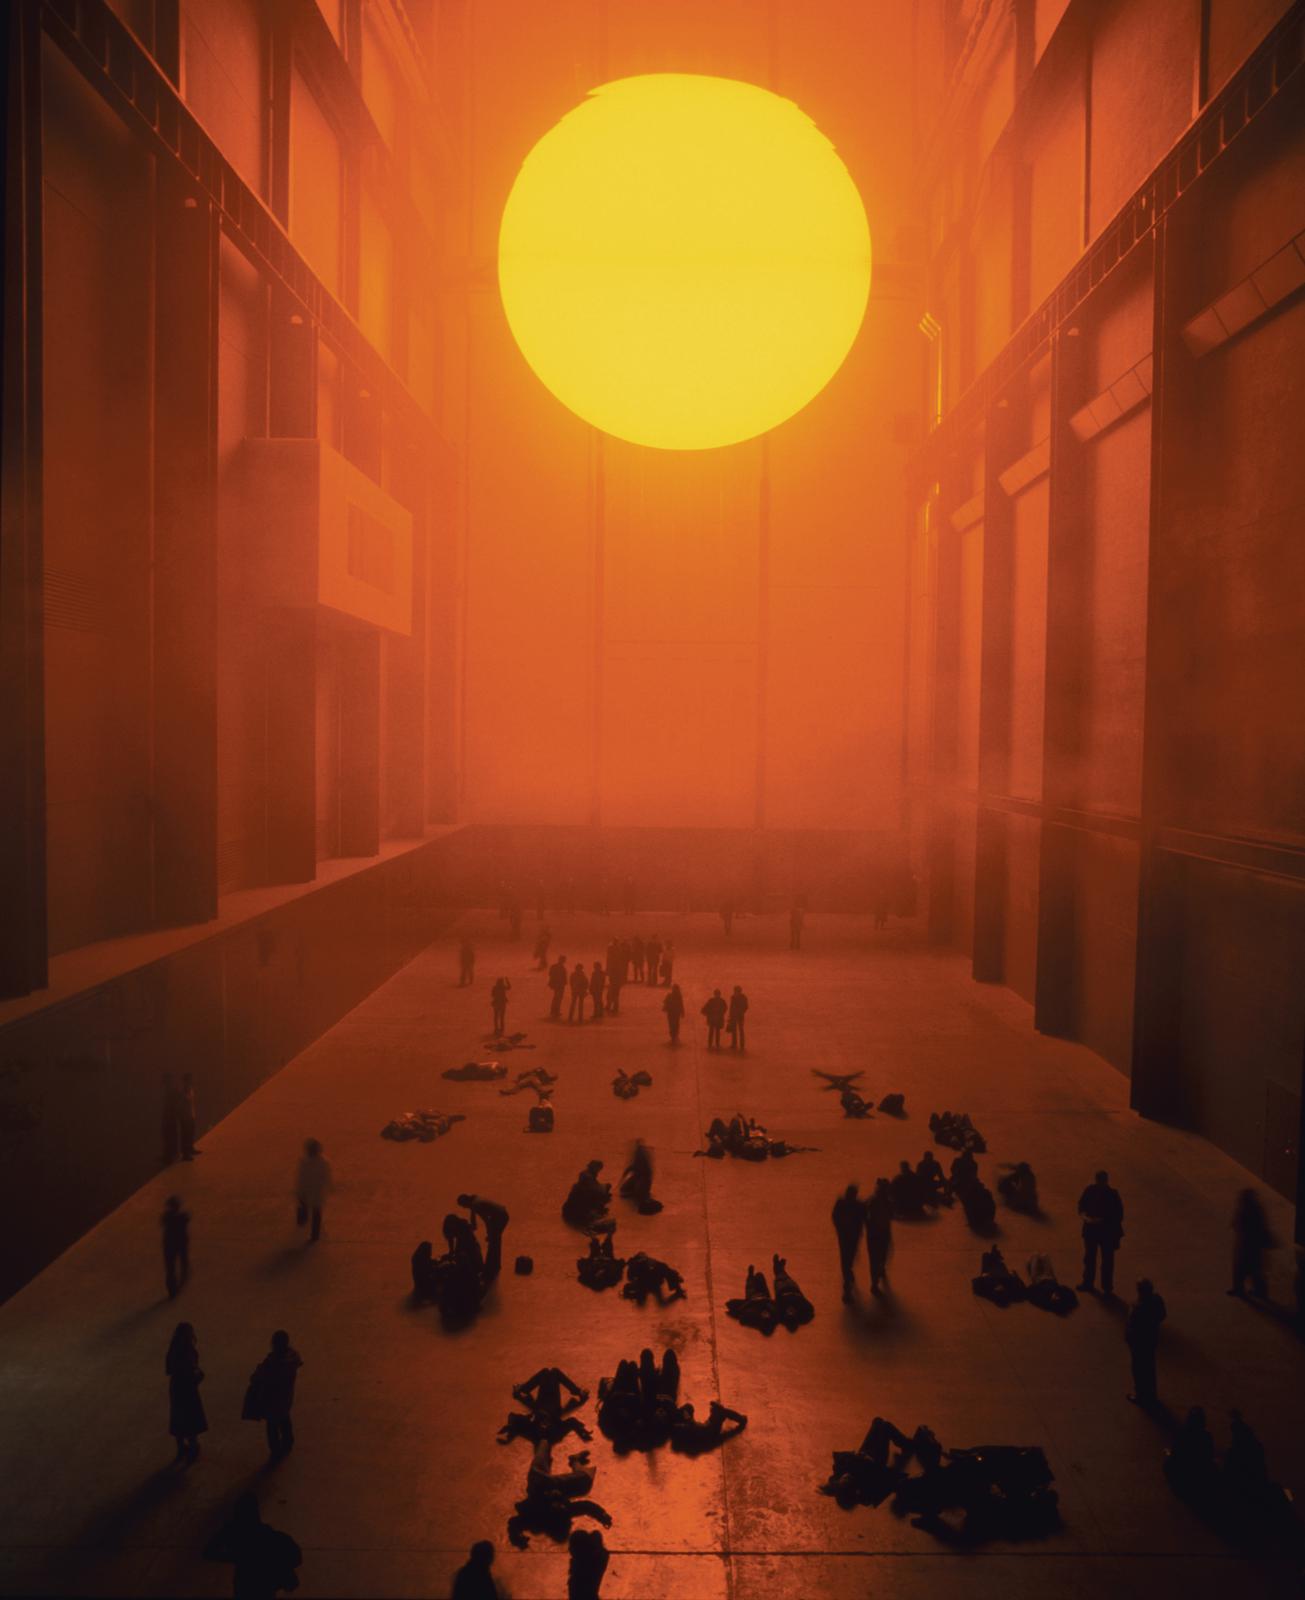 Atrium of the Tate Modern: a bright orange sphere casting light on onlookers